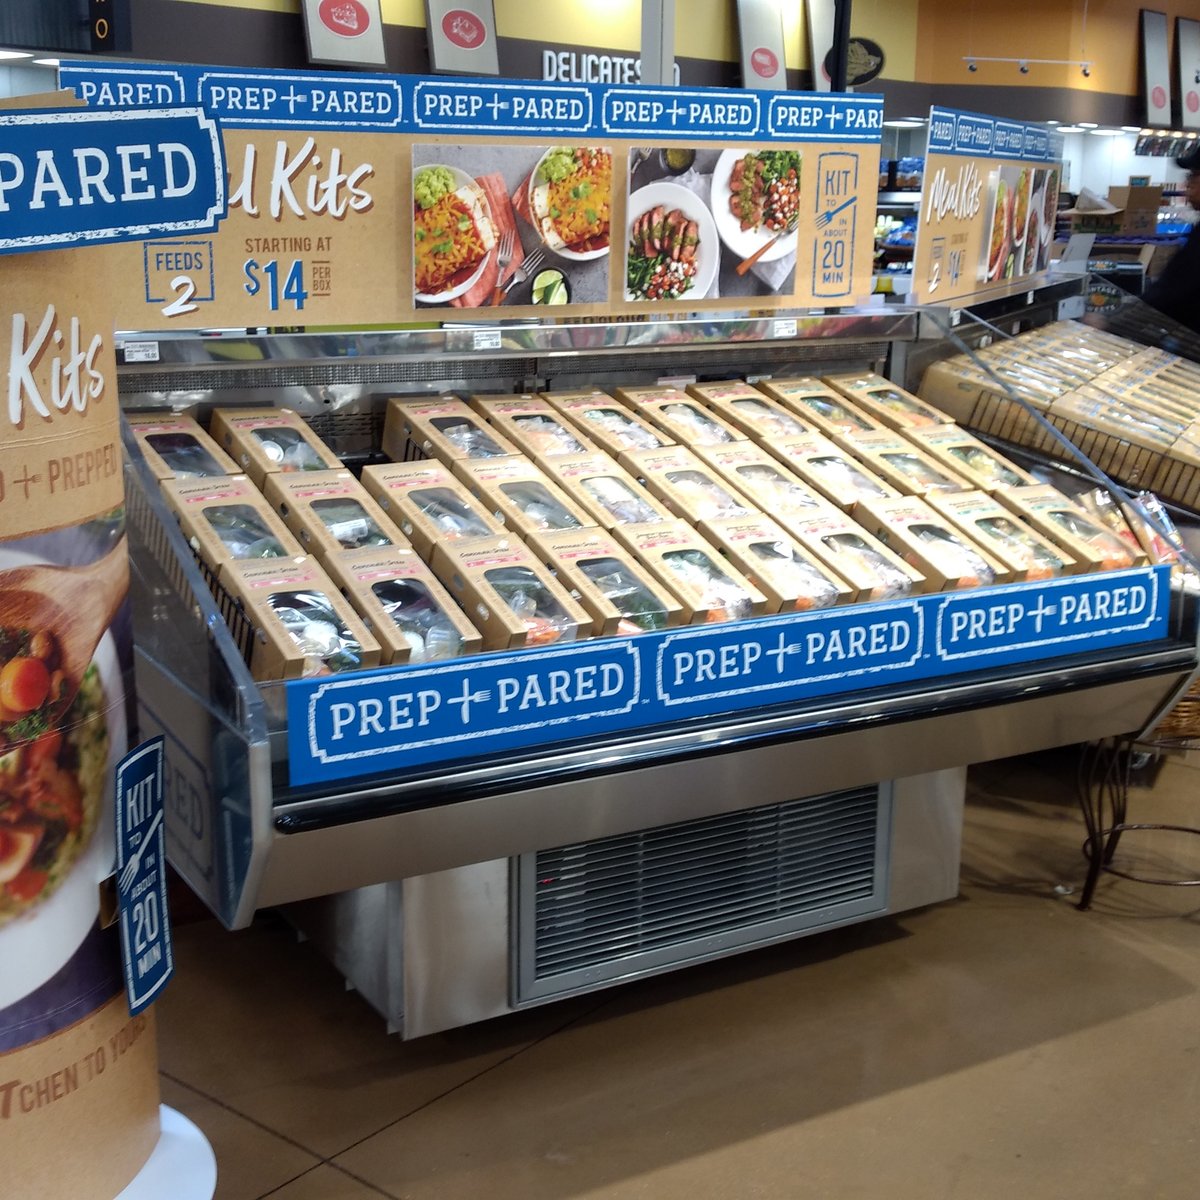 Kroger, Home Chef launch meal kits - Cincinnati Business Courier